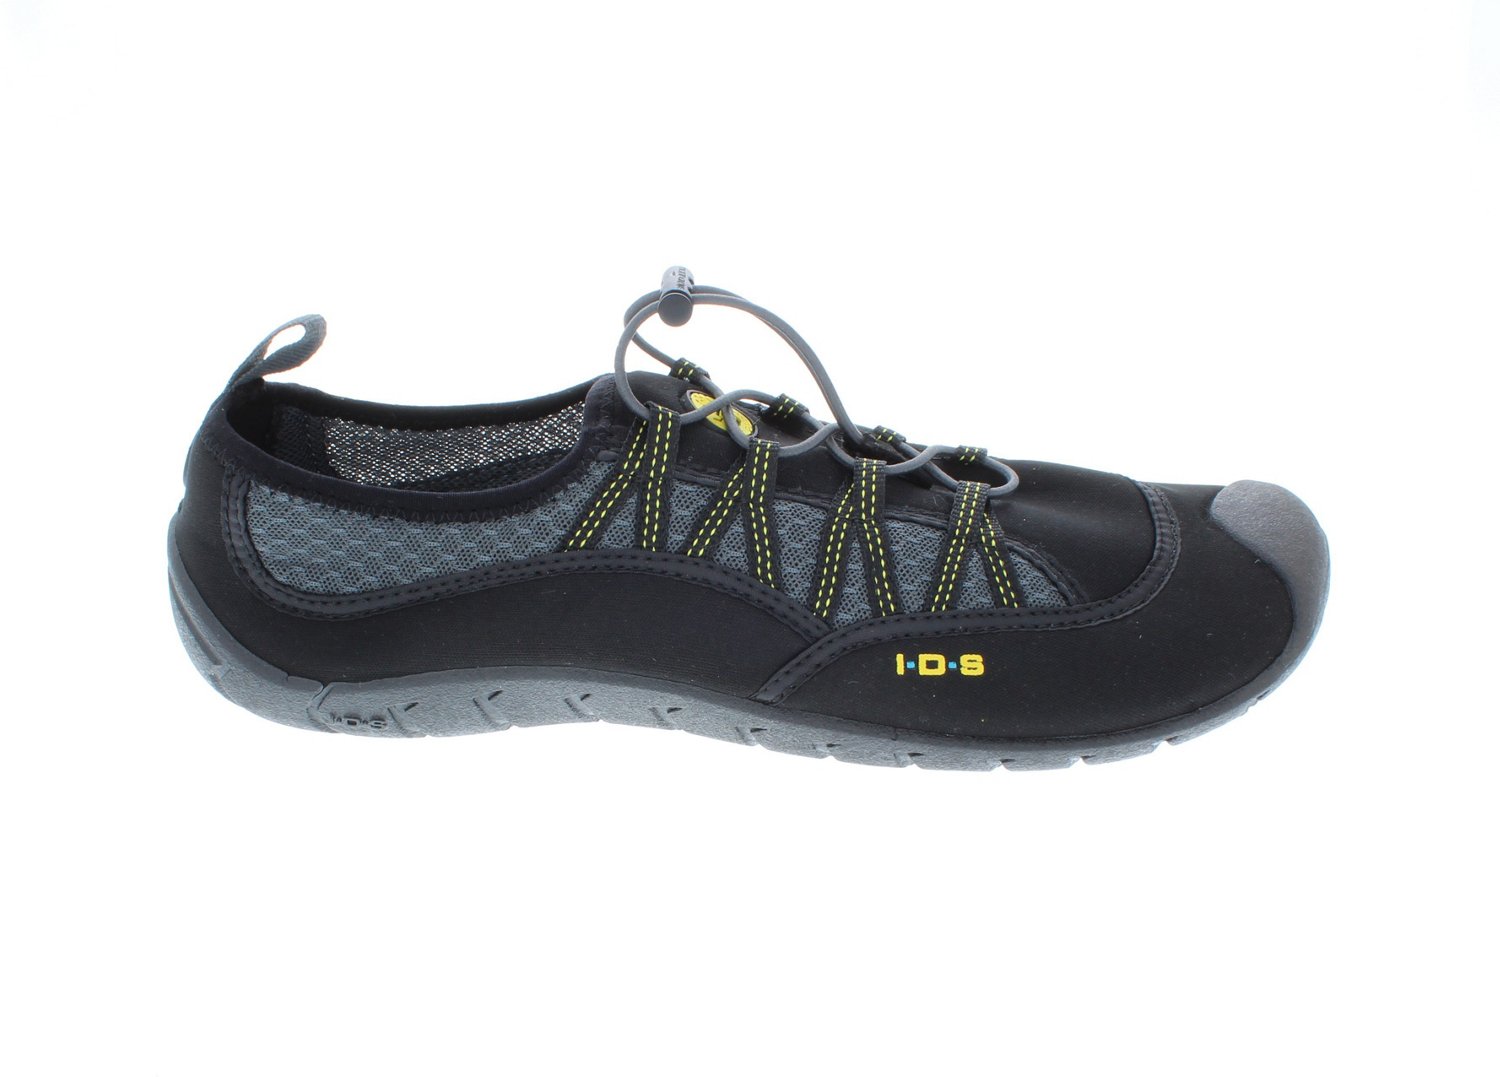 academy sports womens water shoes